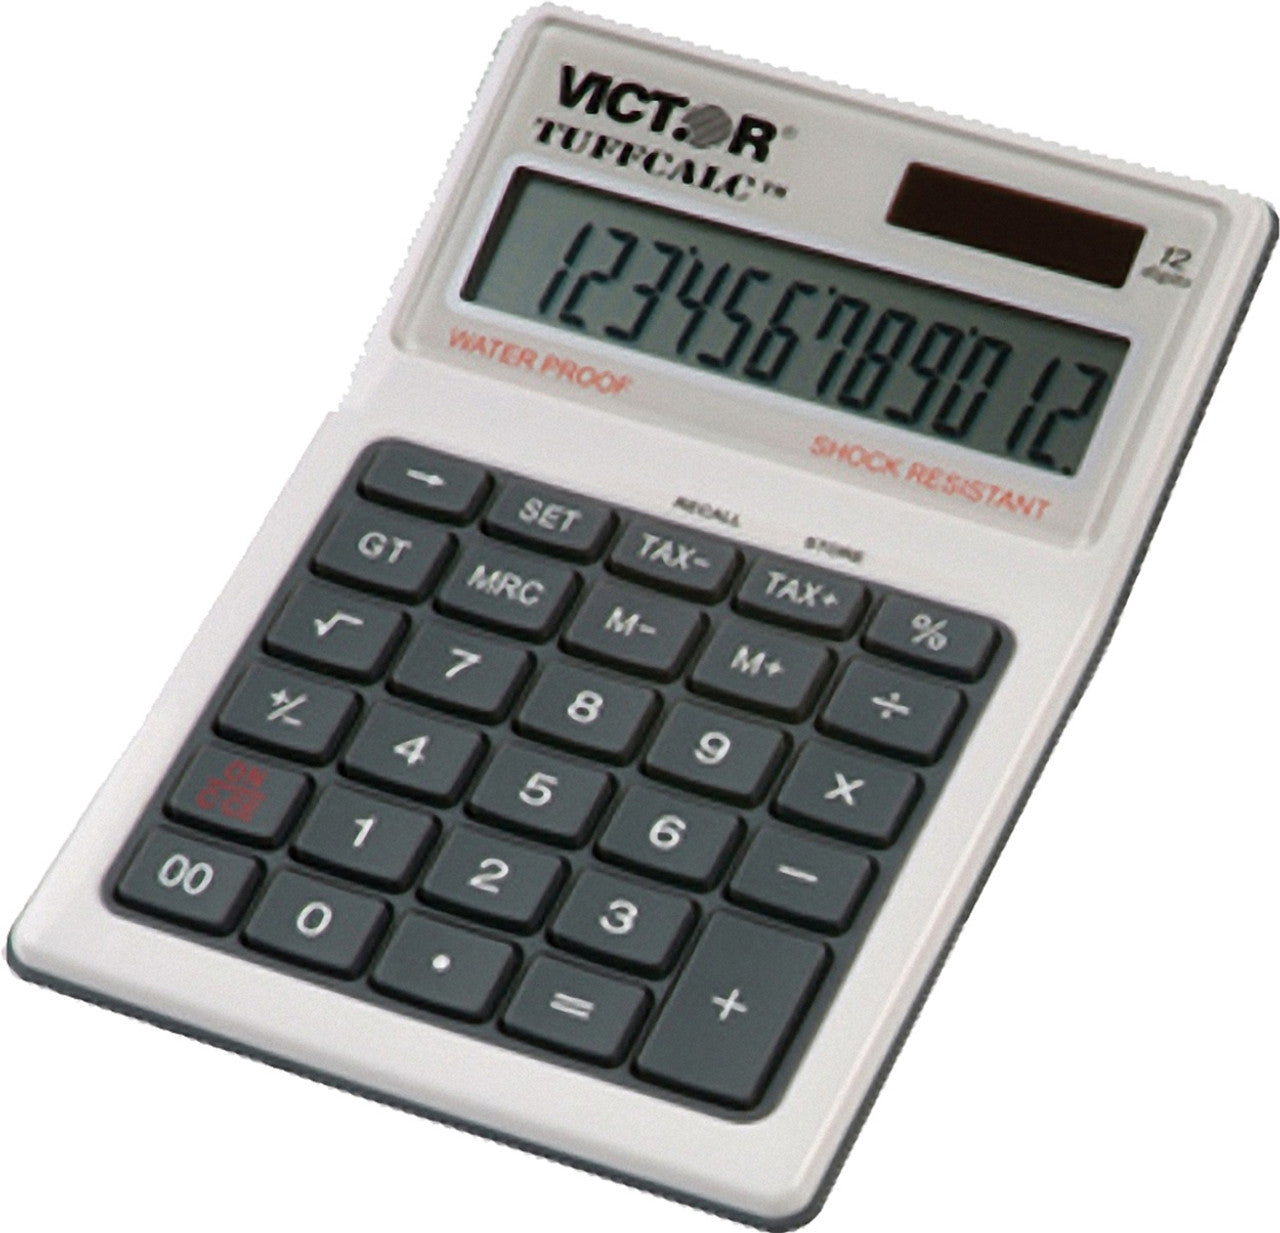 Victor Tuff Calculator Washable, Water and Shock Resistant